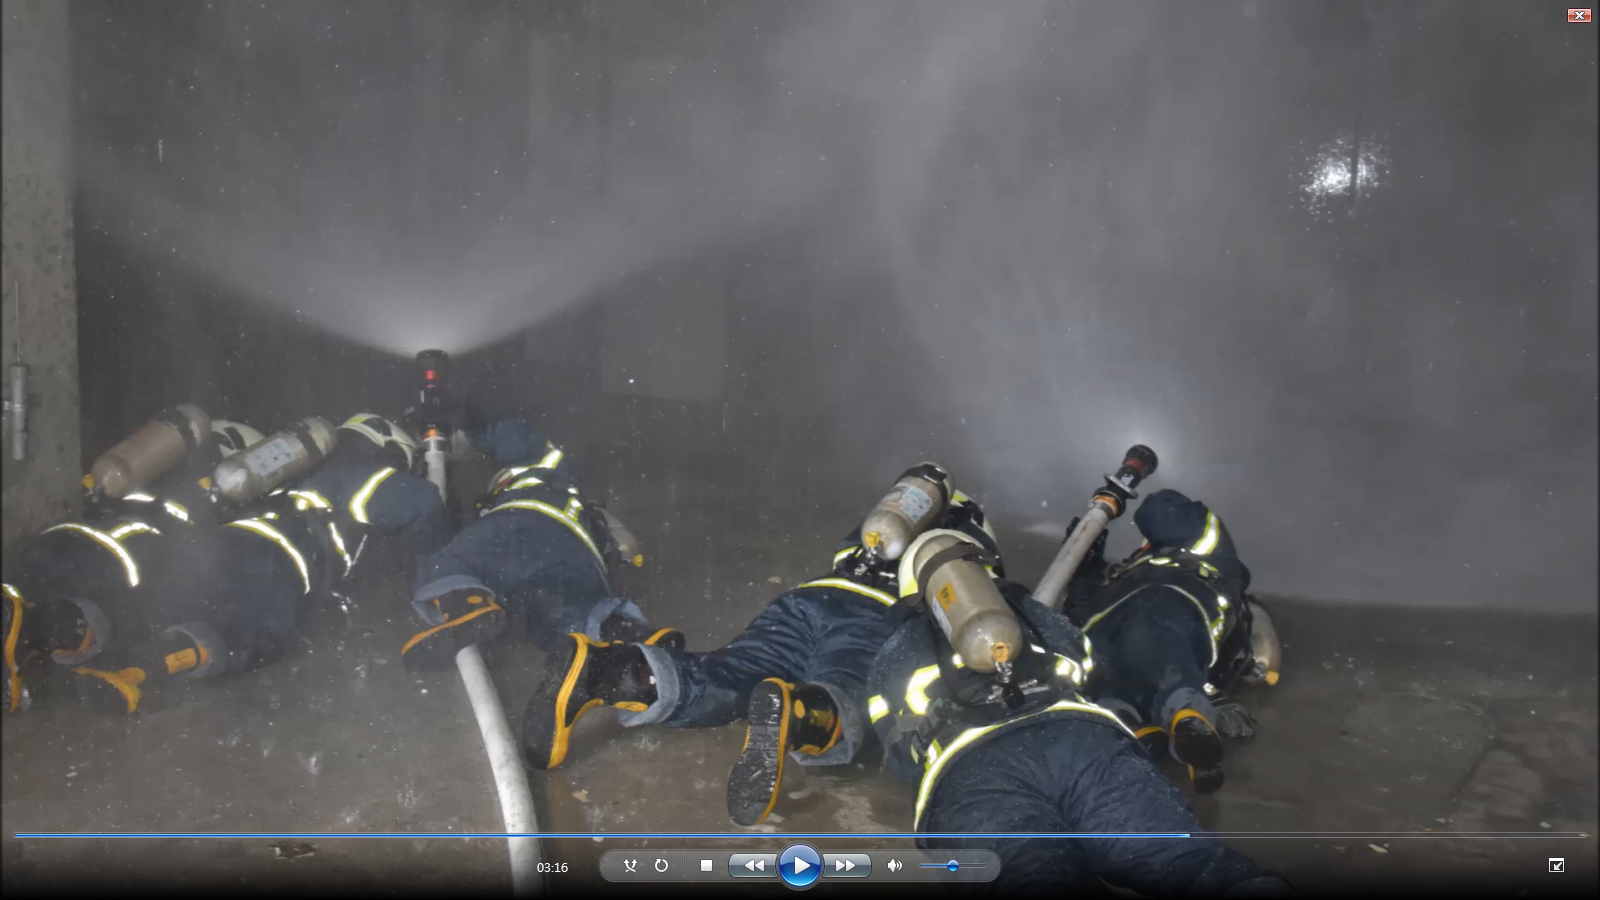 Trainees learn to contain the fire (a simulated drill).